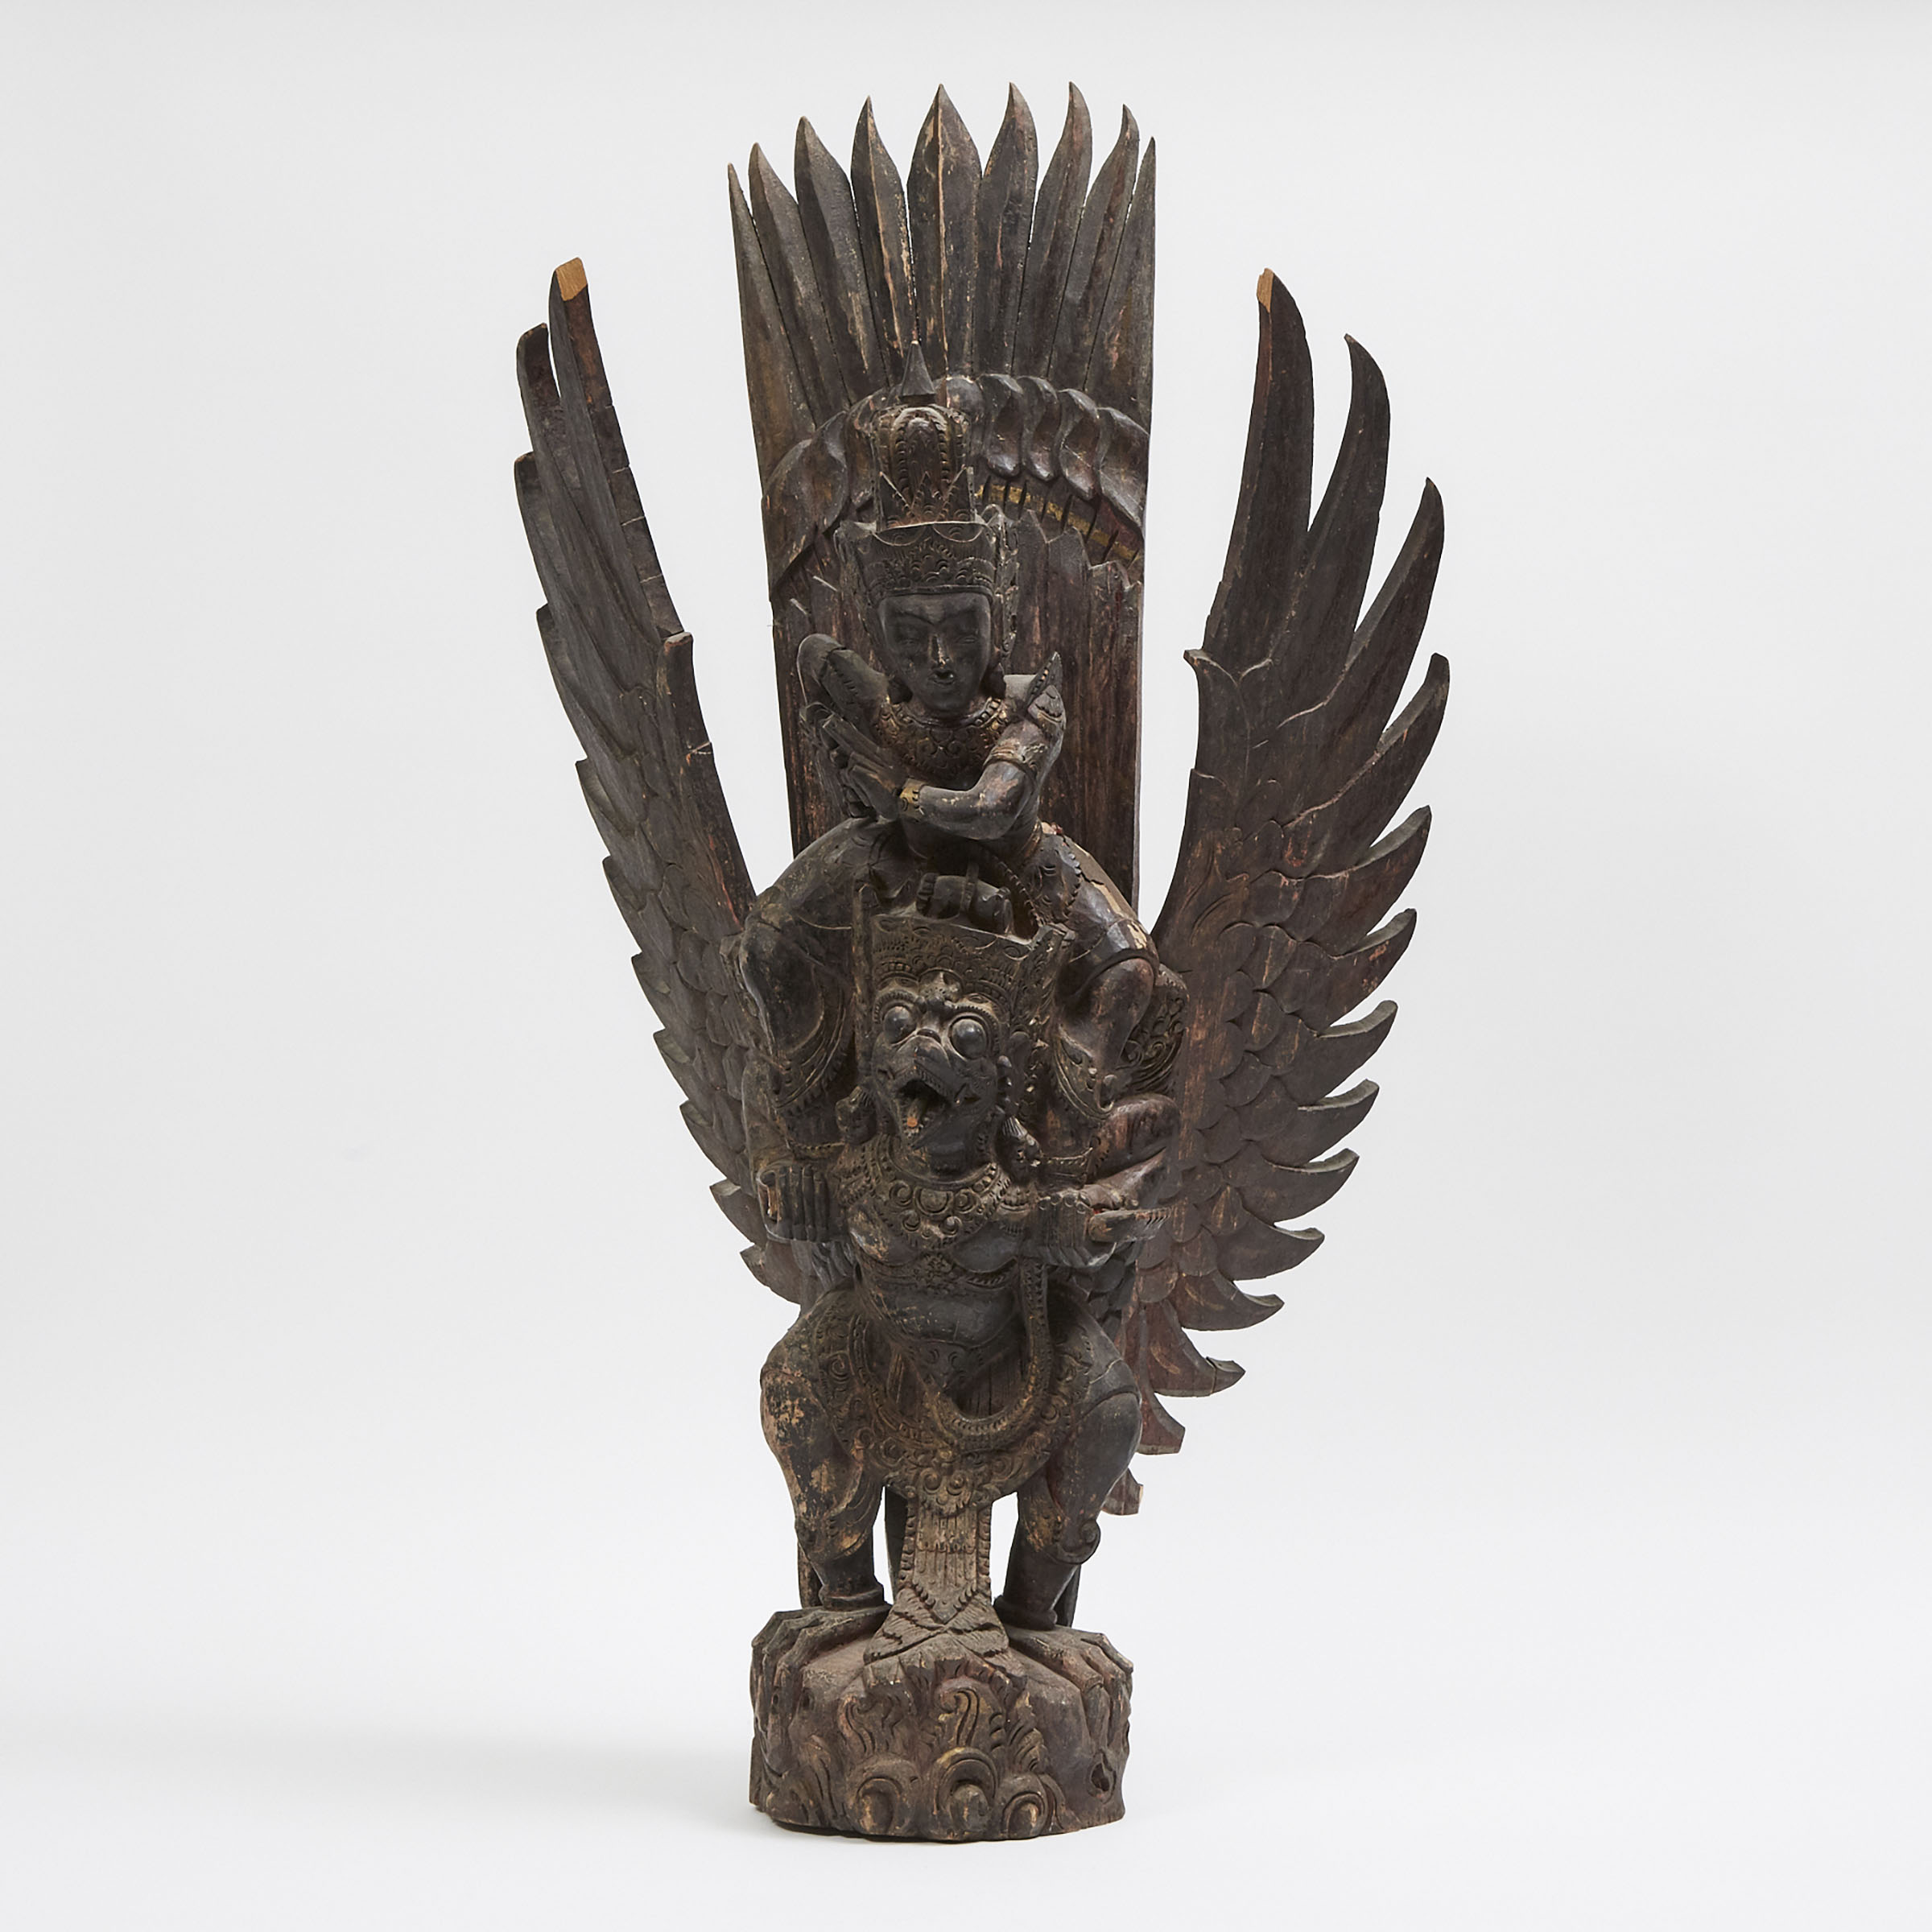 A Balinese Wood Carved Sculpture of Vishnu Riding Garuda, 19th/Early 20th Century